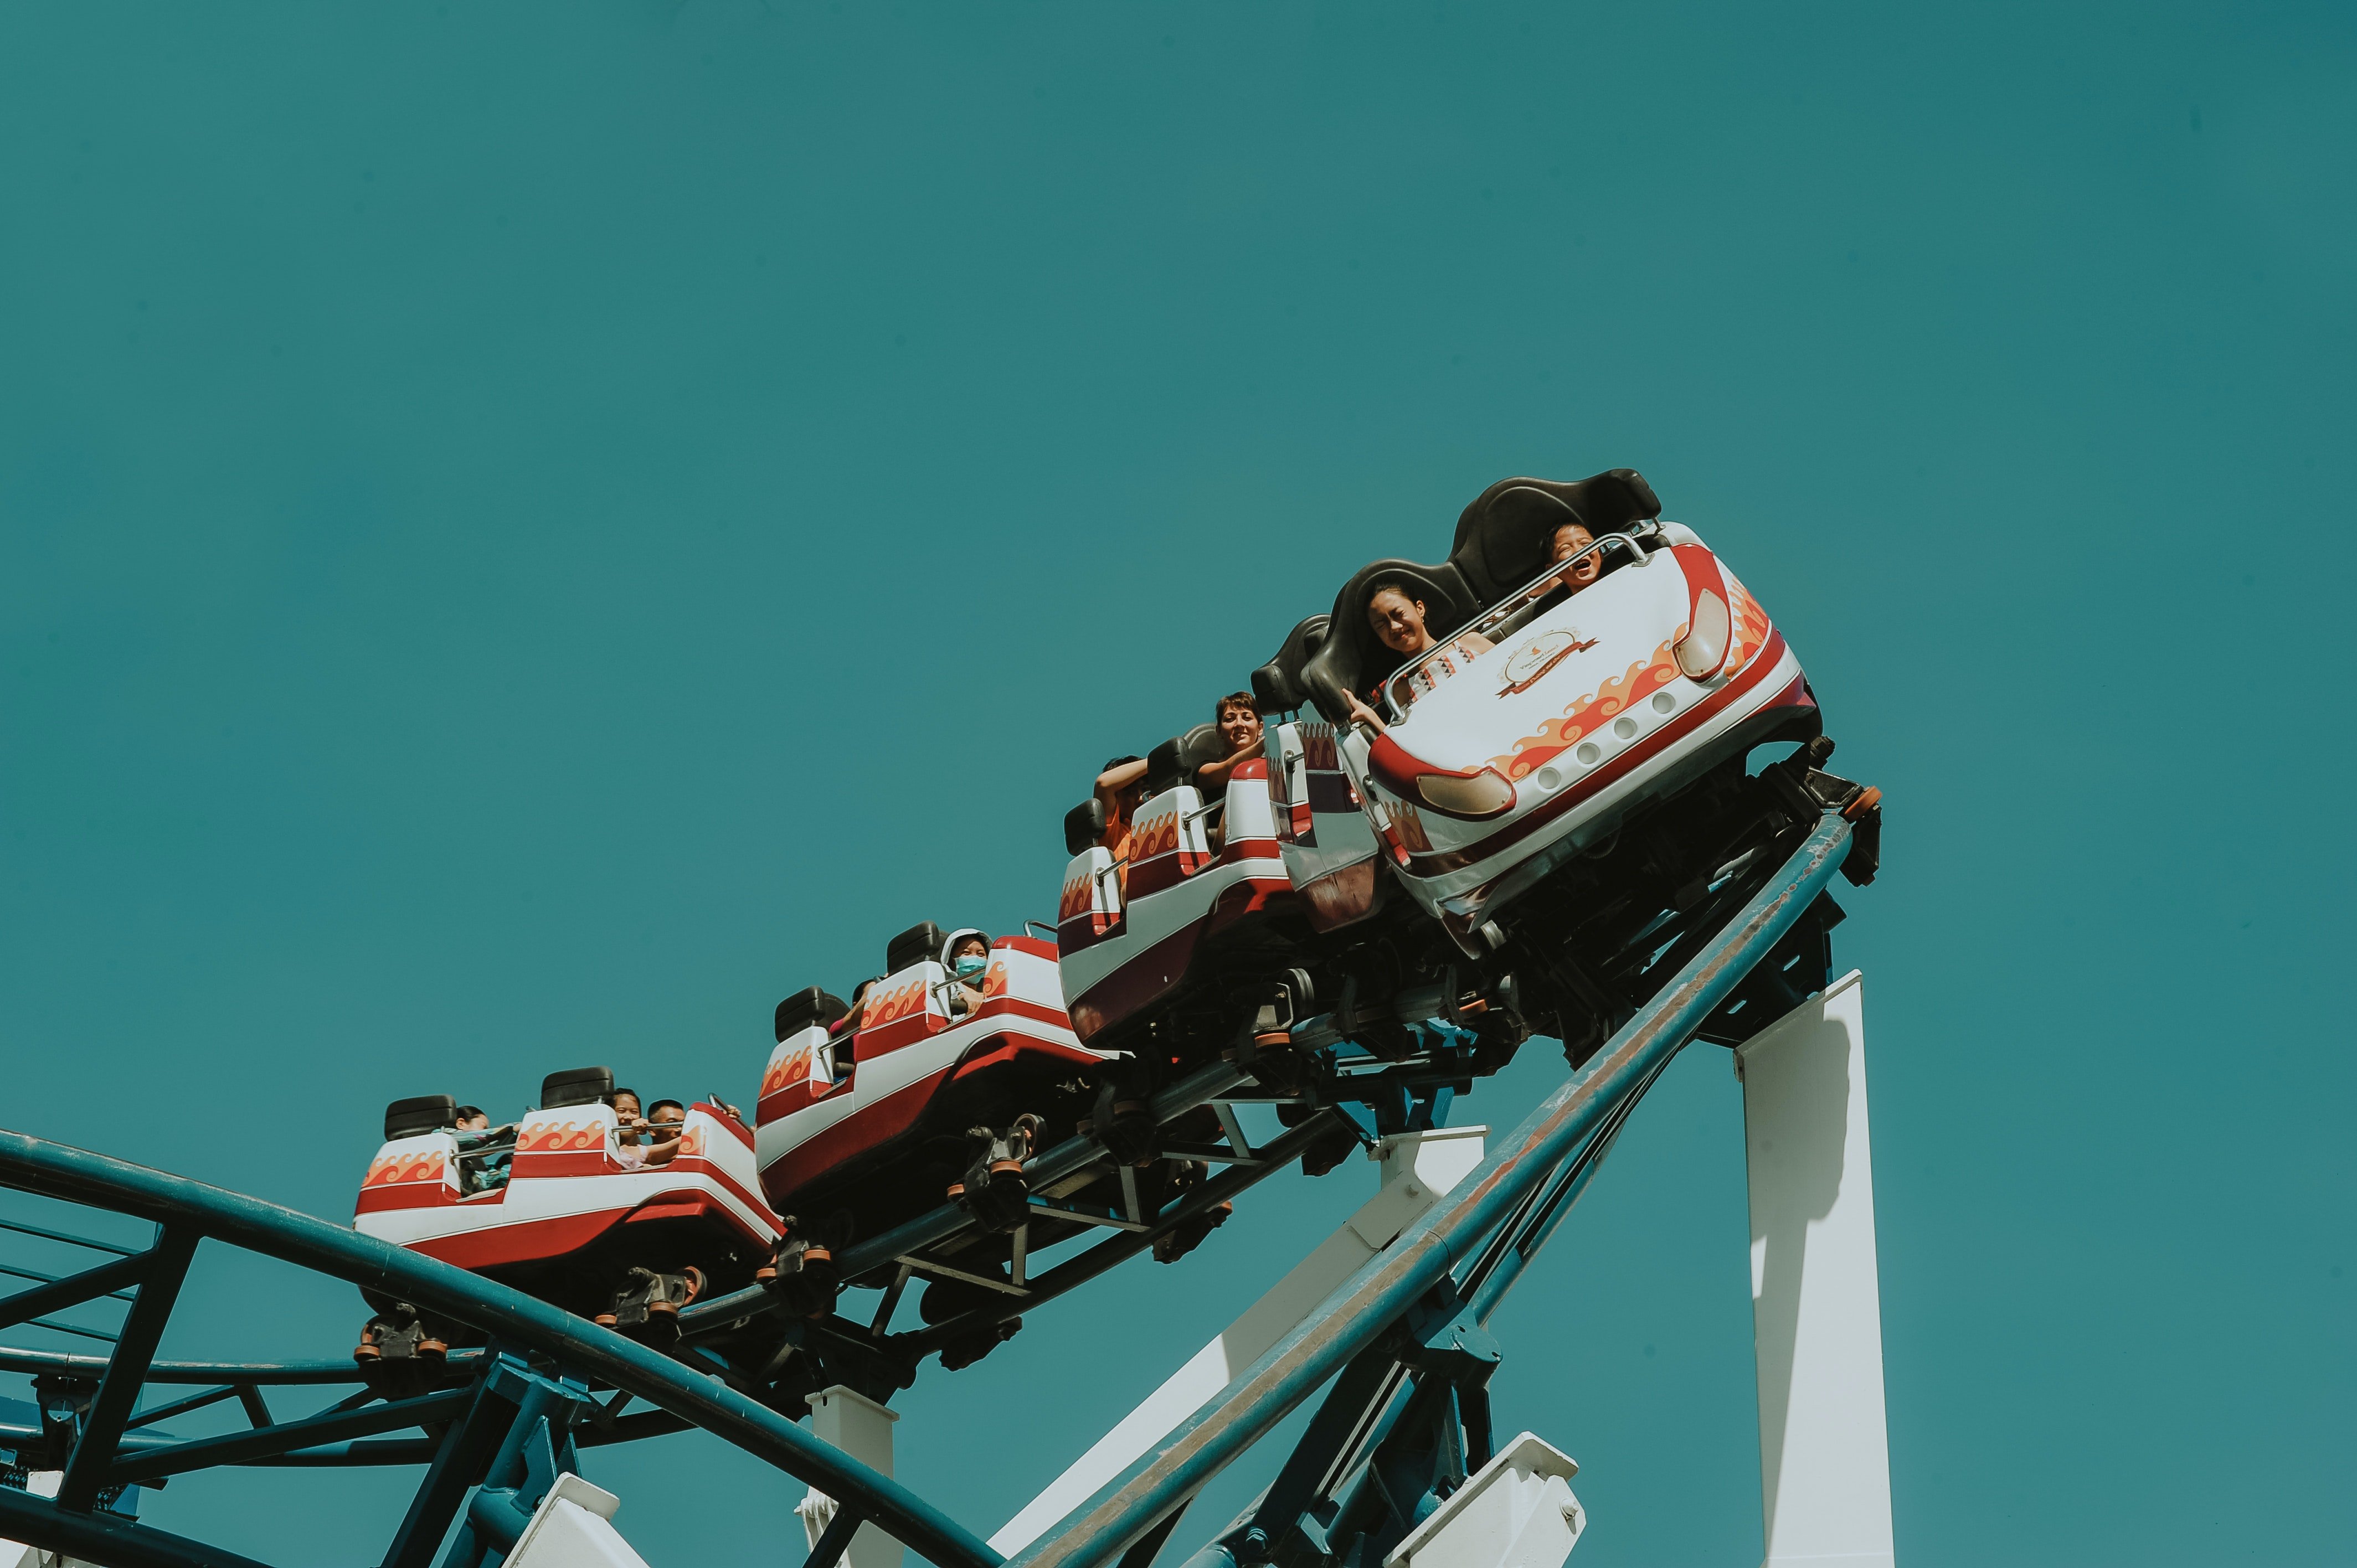 My friends forced me to ride the roller coaster | Photo: Pexels